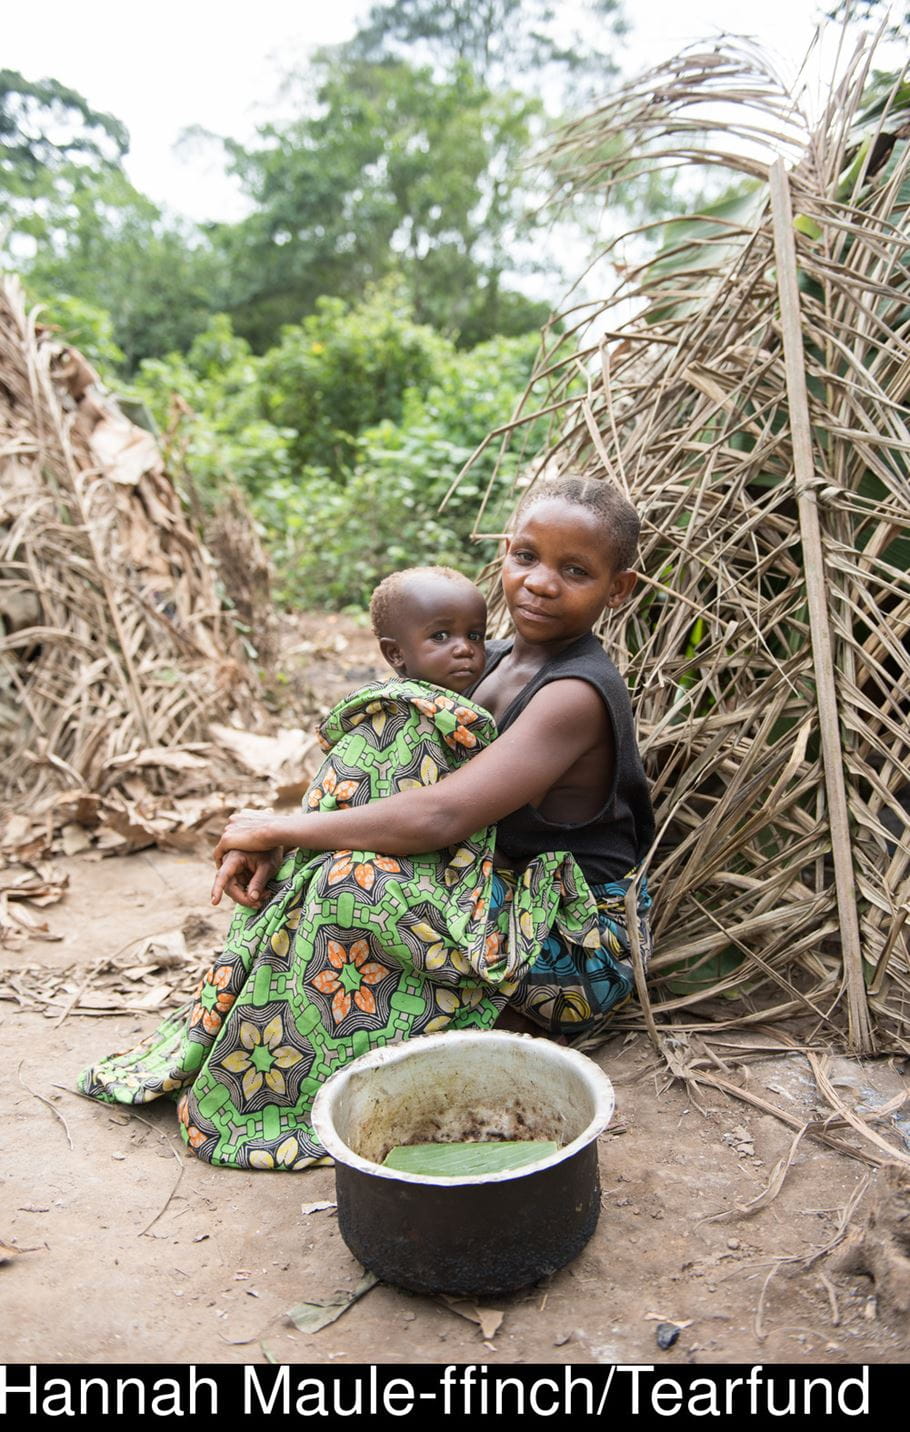 Matunda from DRC with one of her children